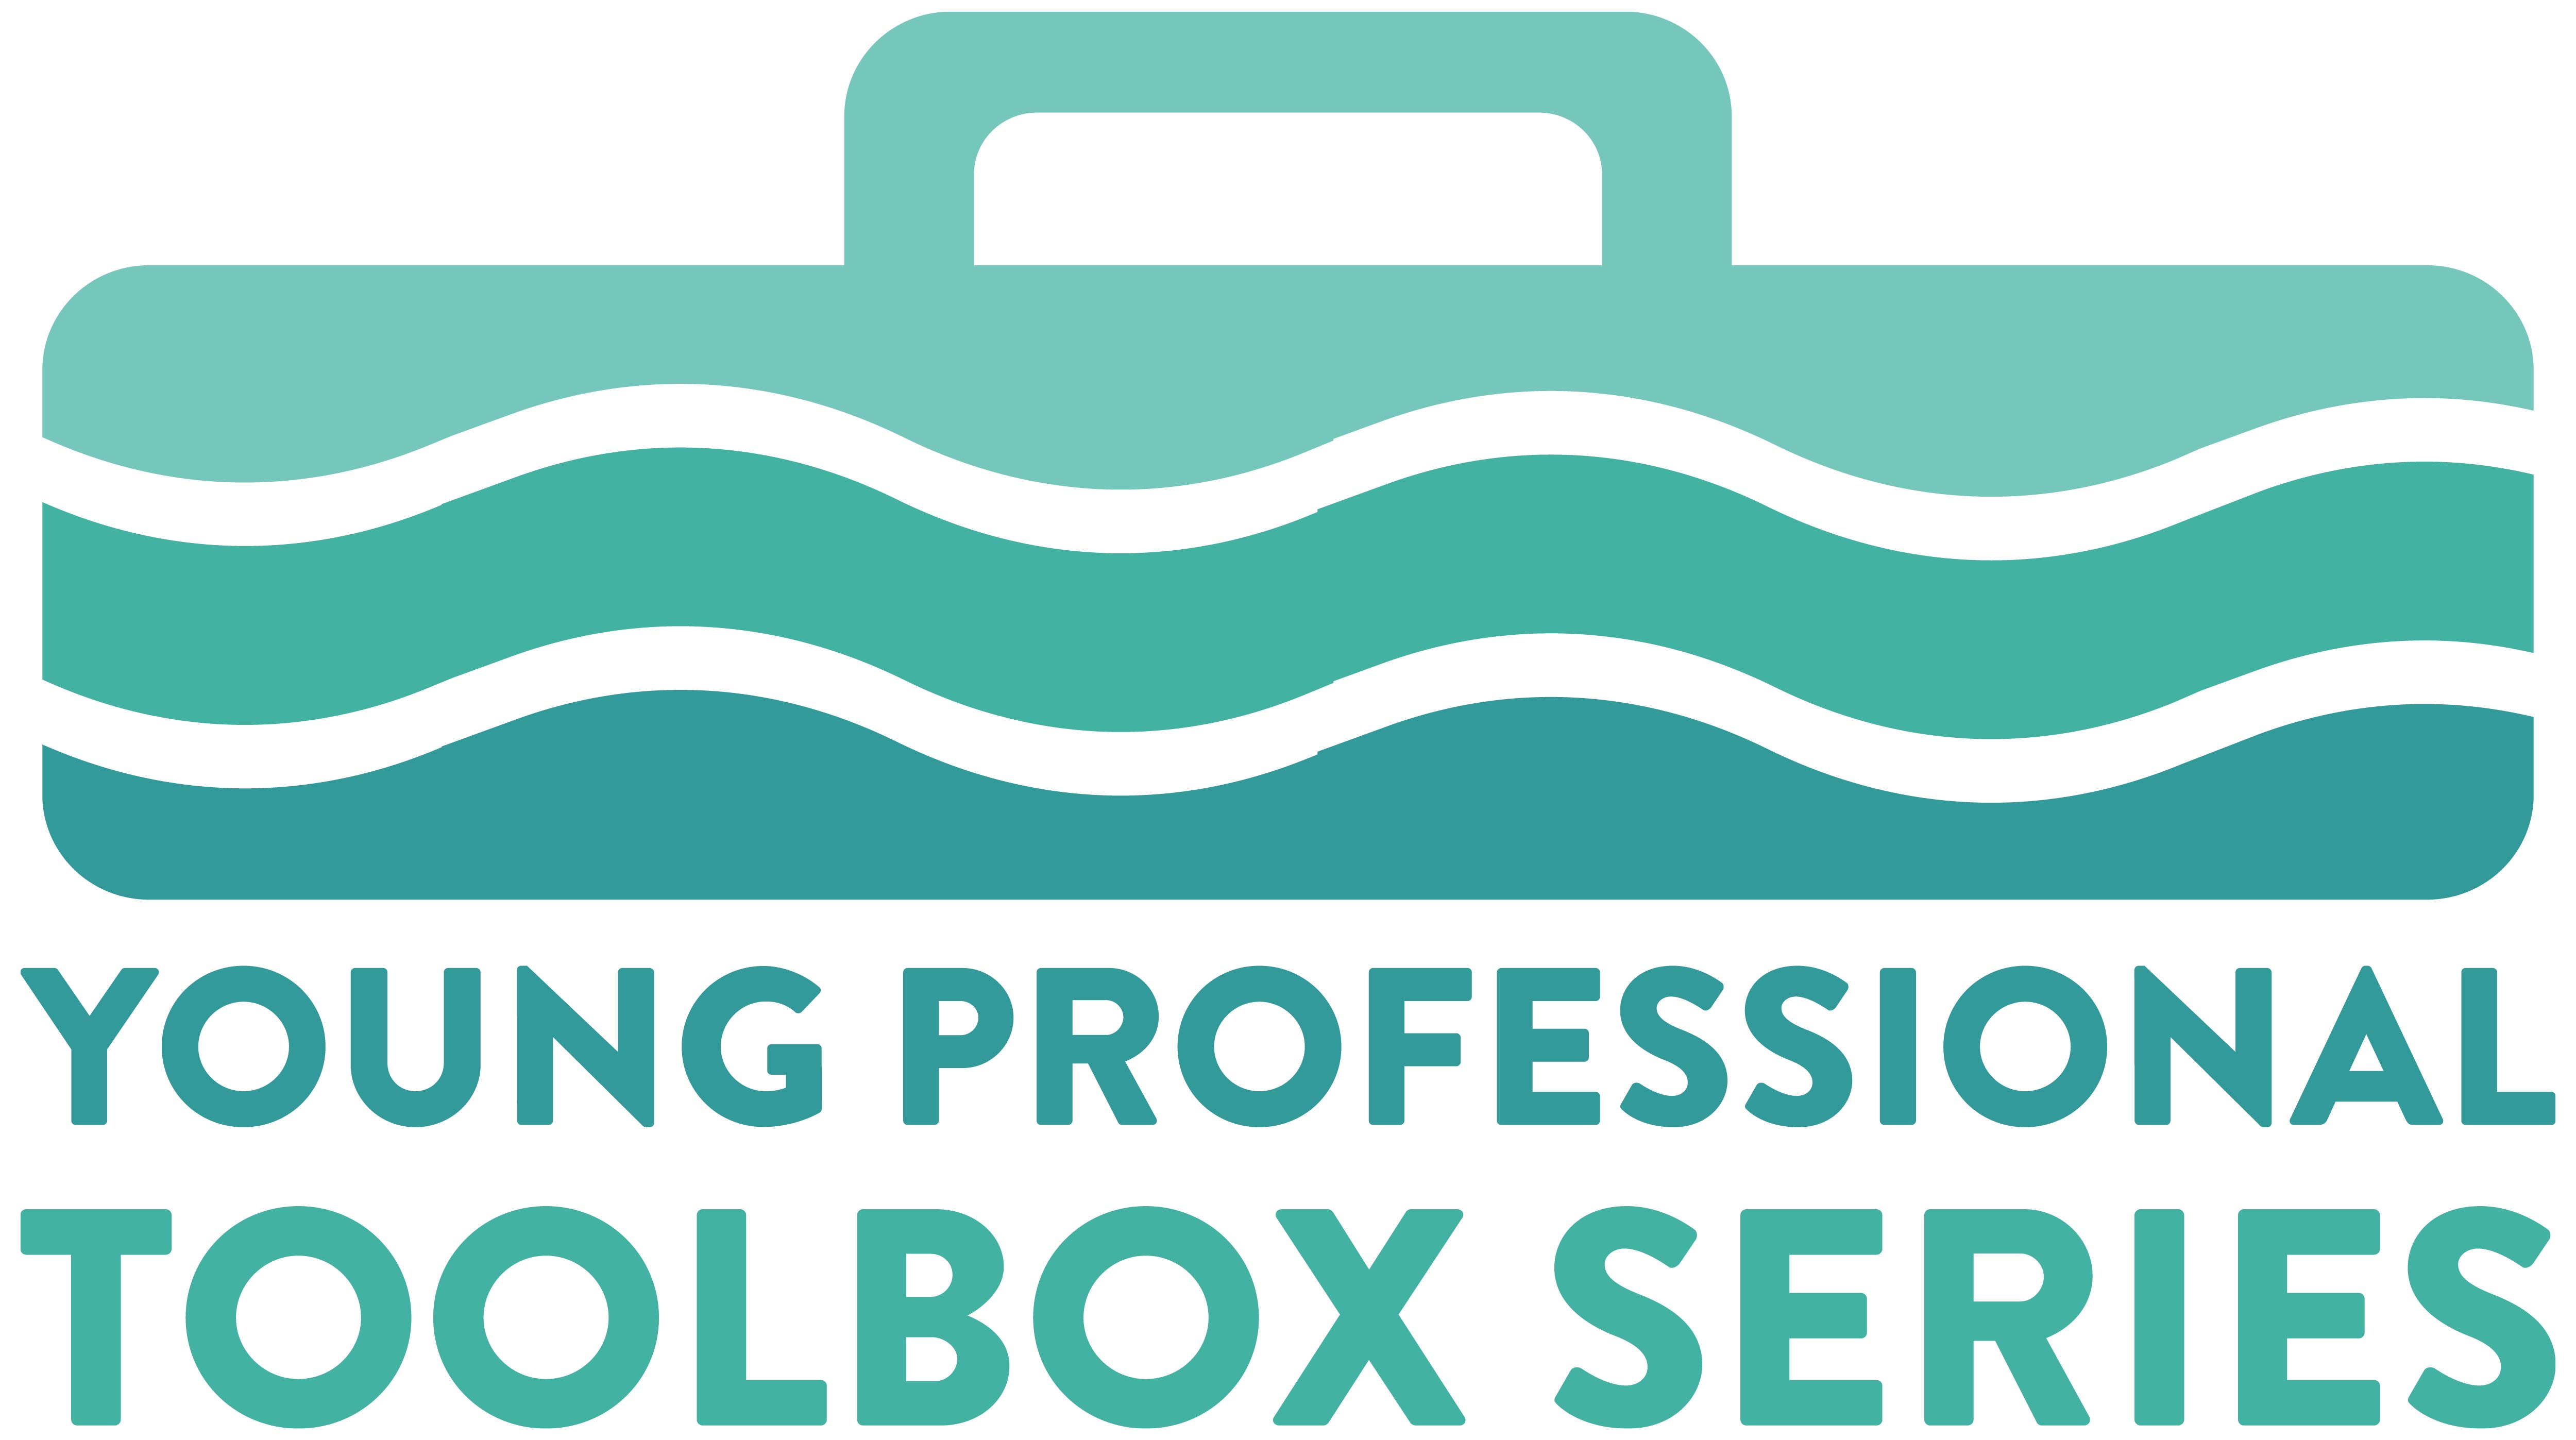 Young Professionals Toolbox Series